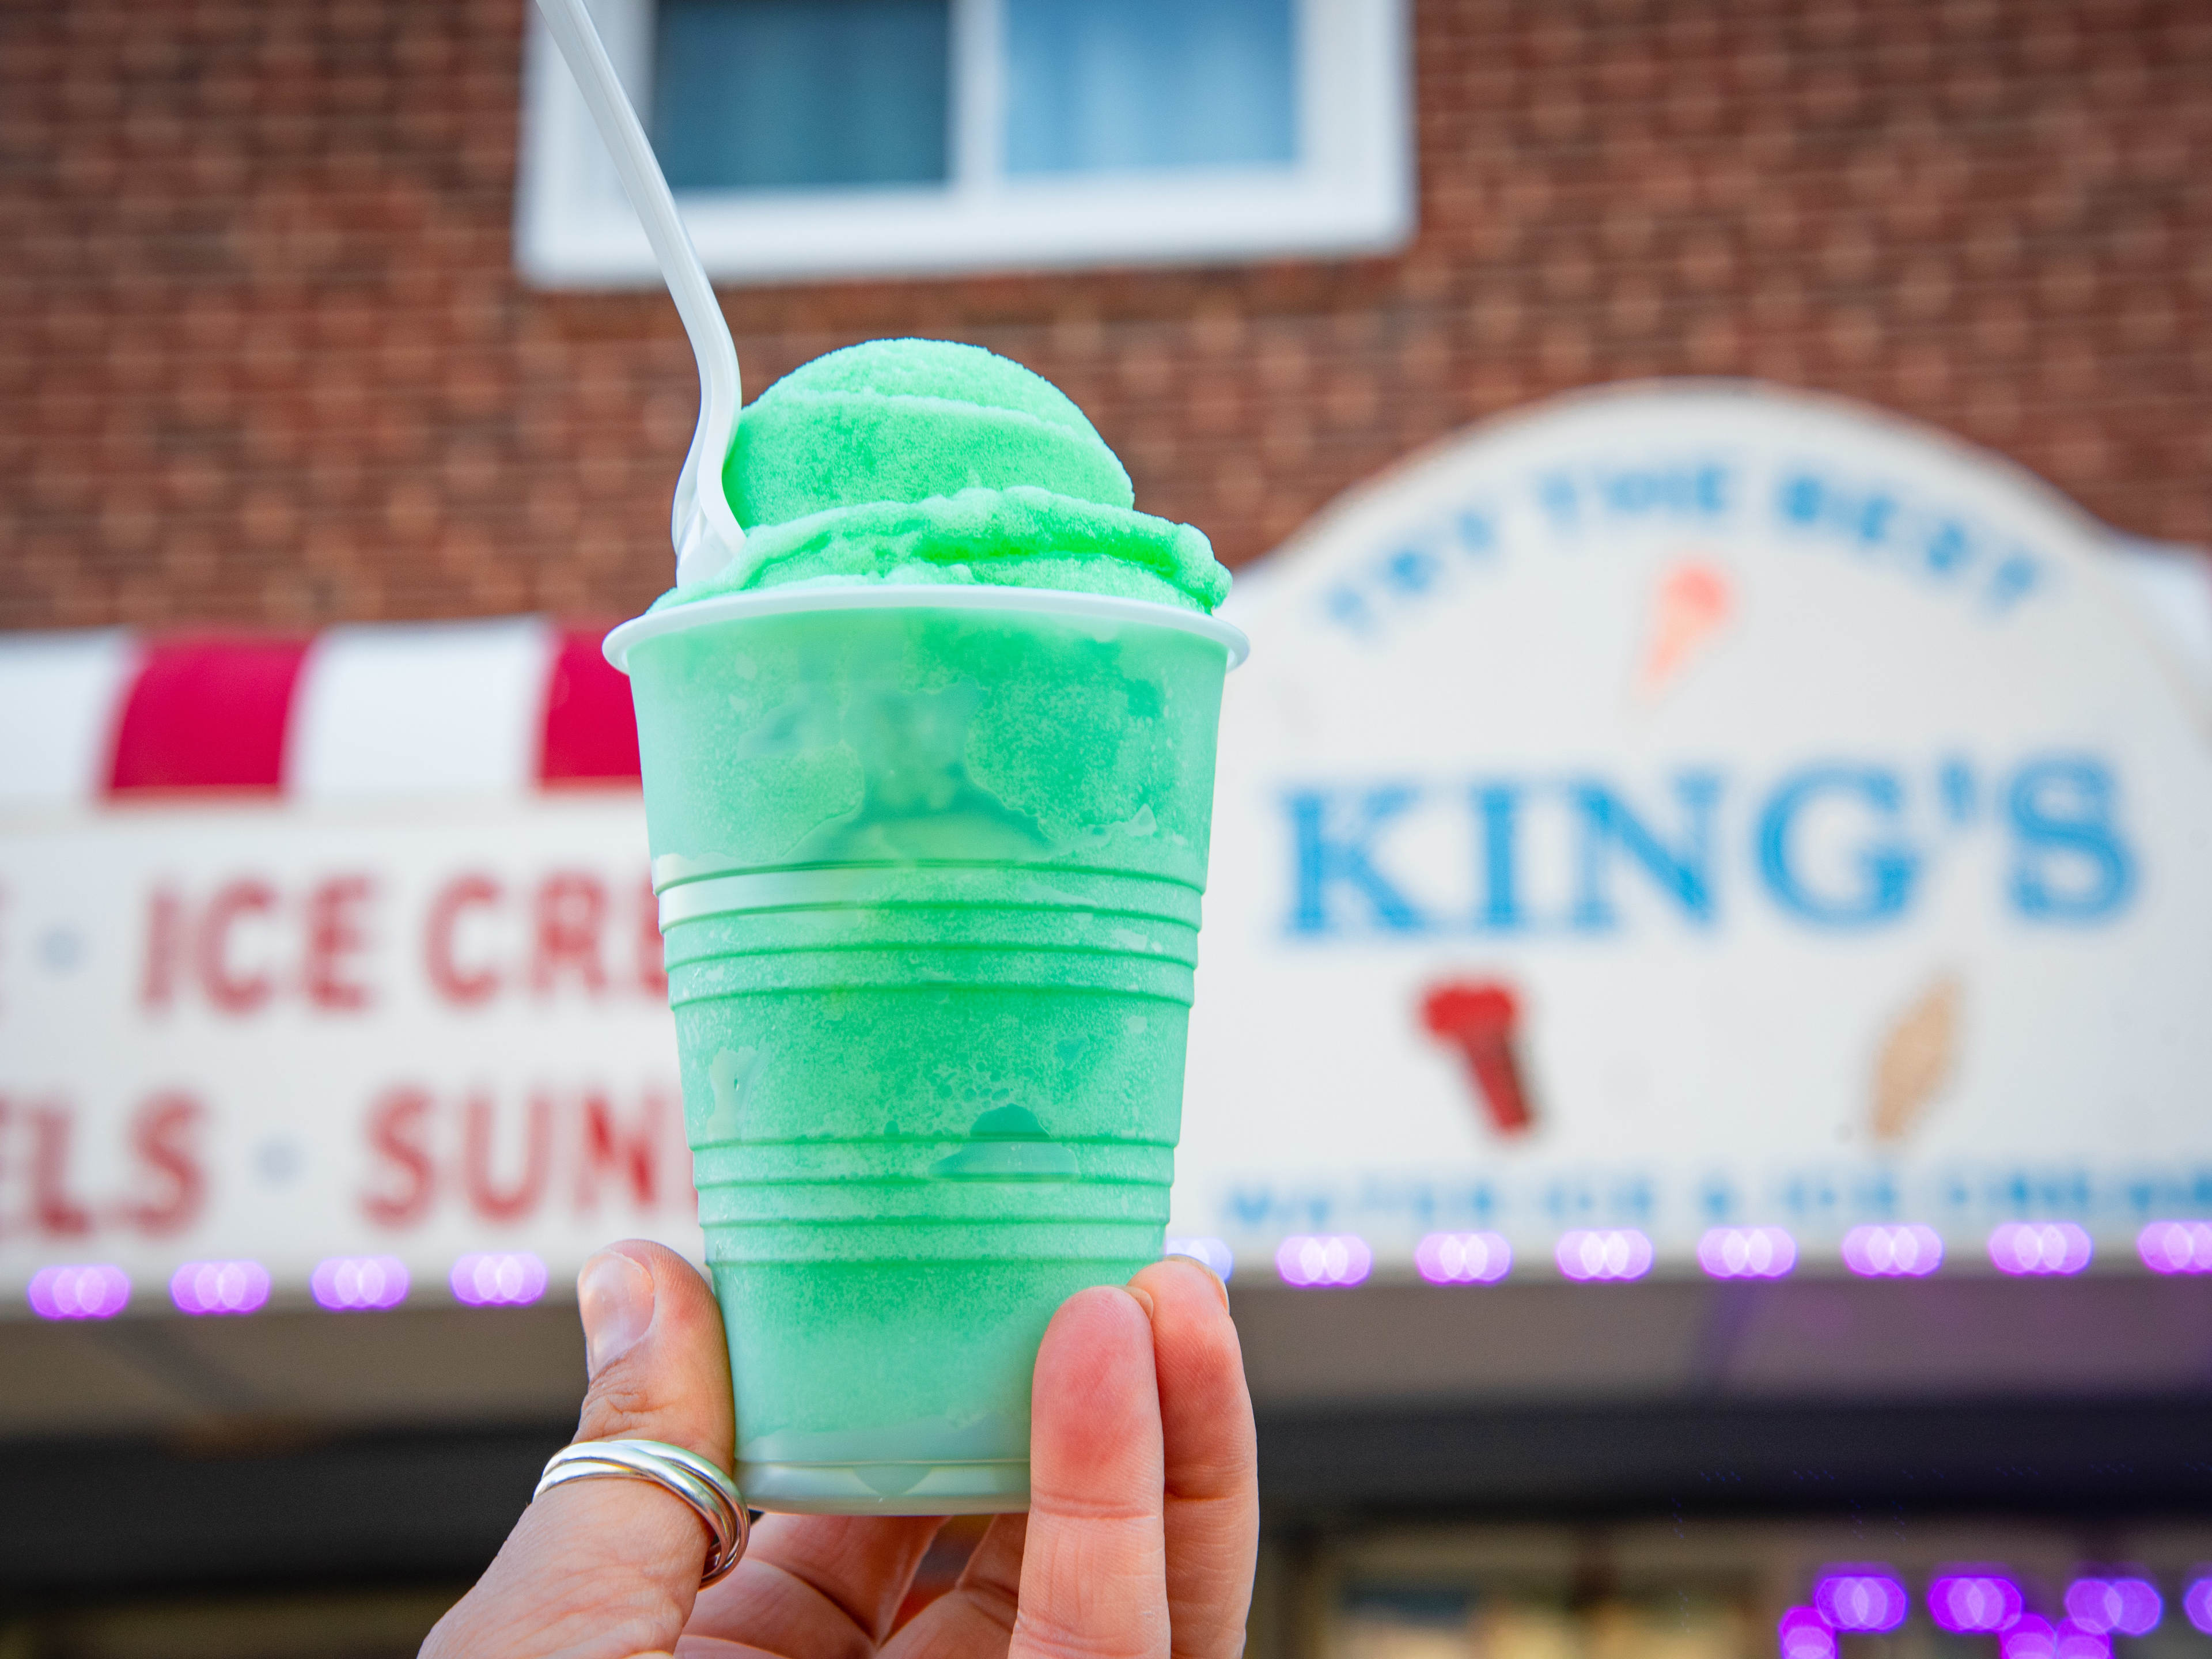 This is a water ice from King’s Water Ice.